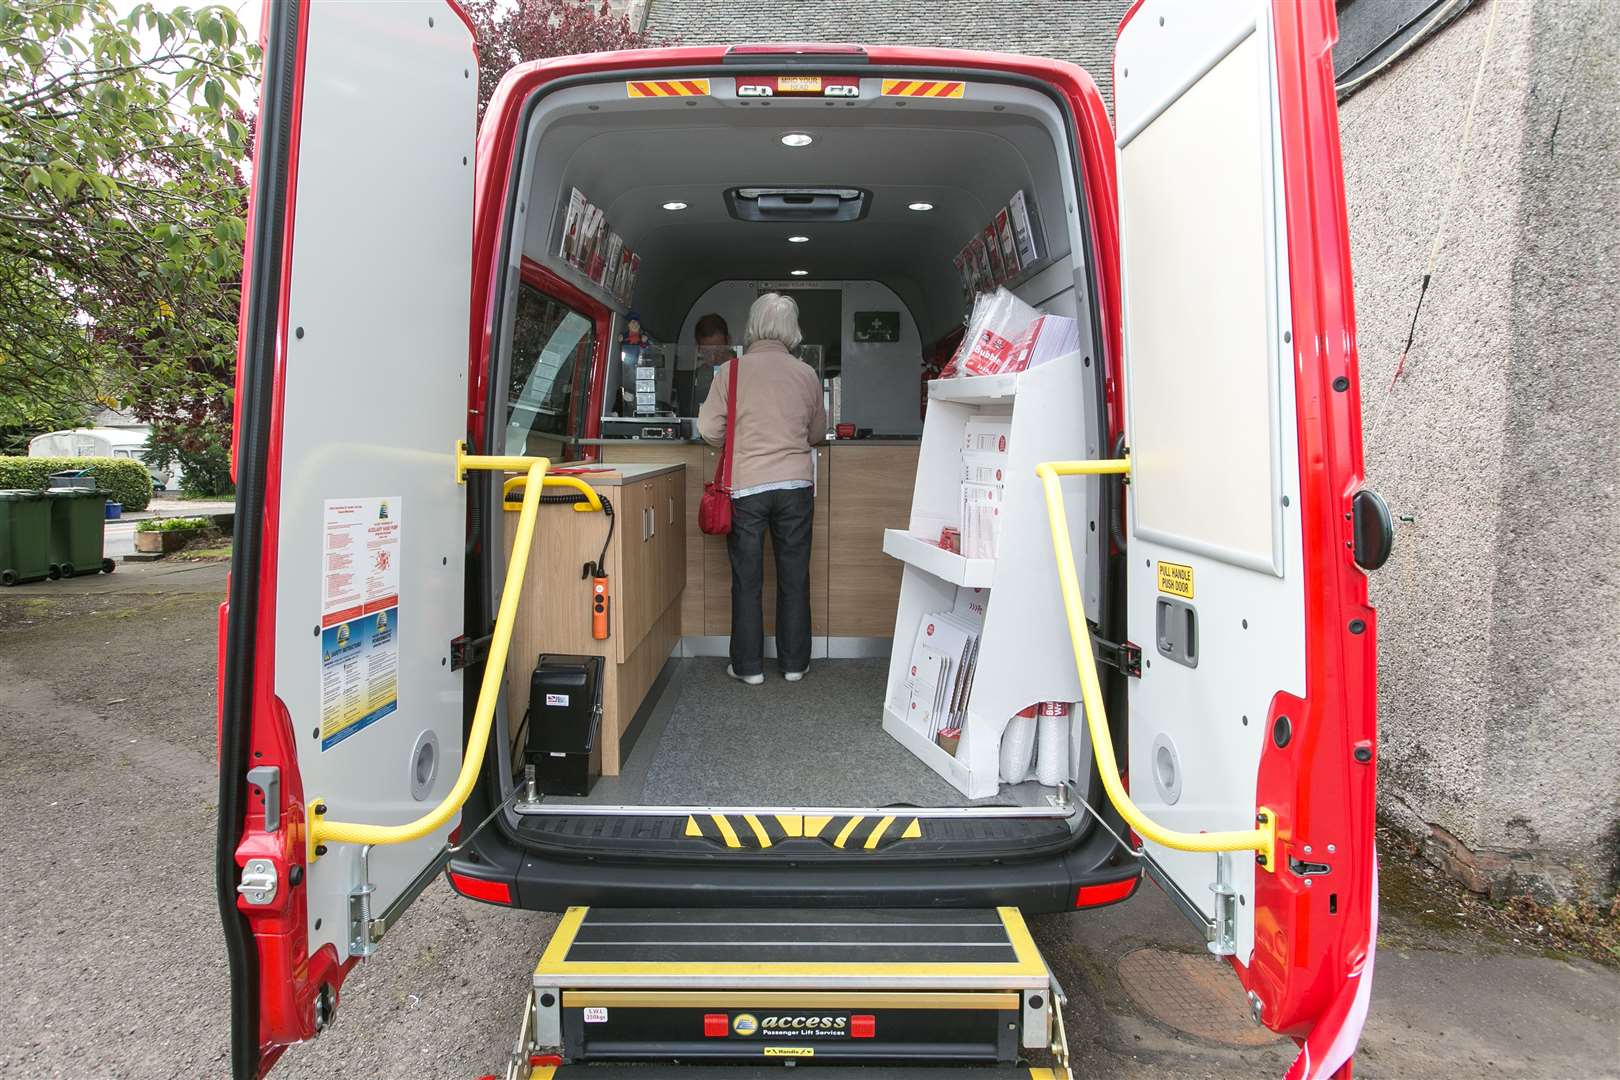 The mobile post office will serve rural communities. Picture: Mark K Jackson